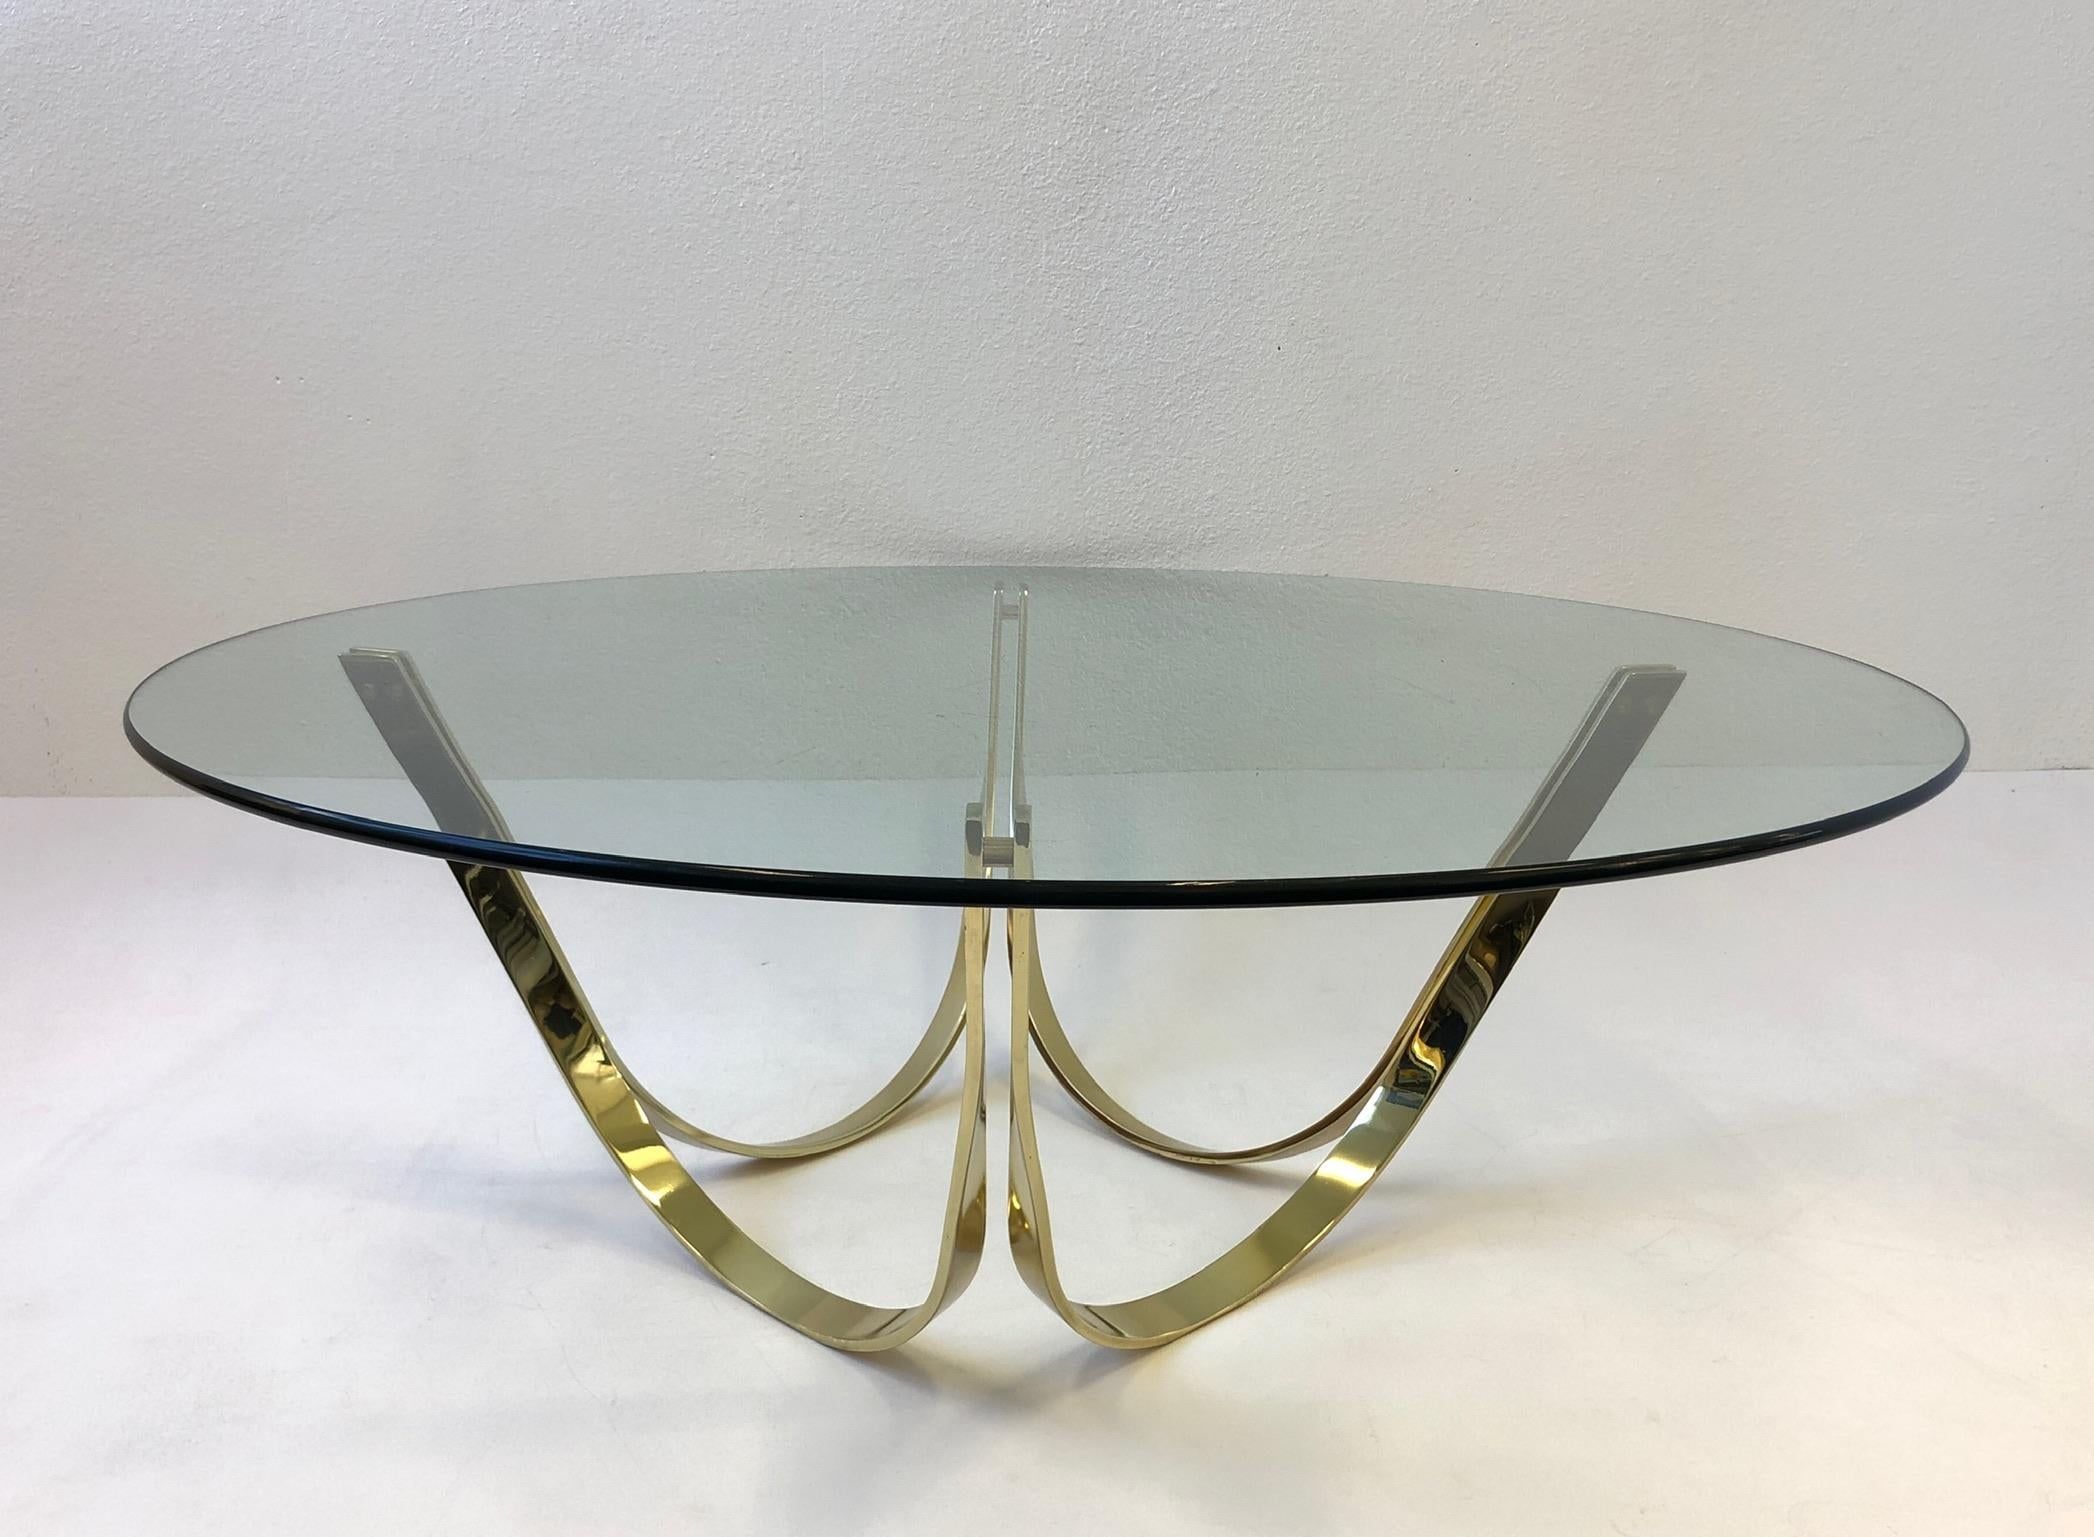 Polished Polish Brass and Glass Cocktail Table by Tri-Mark